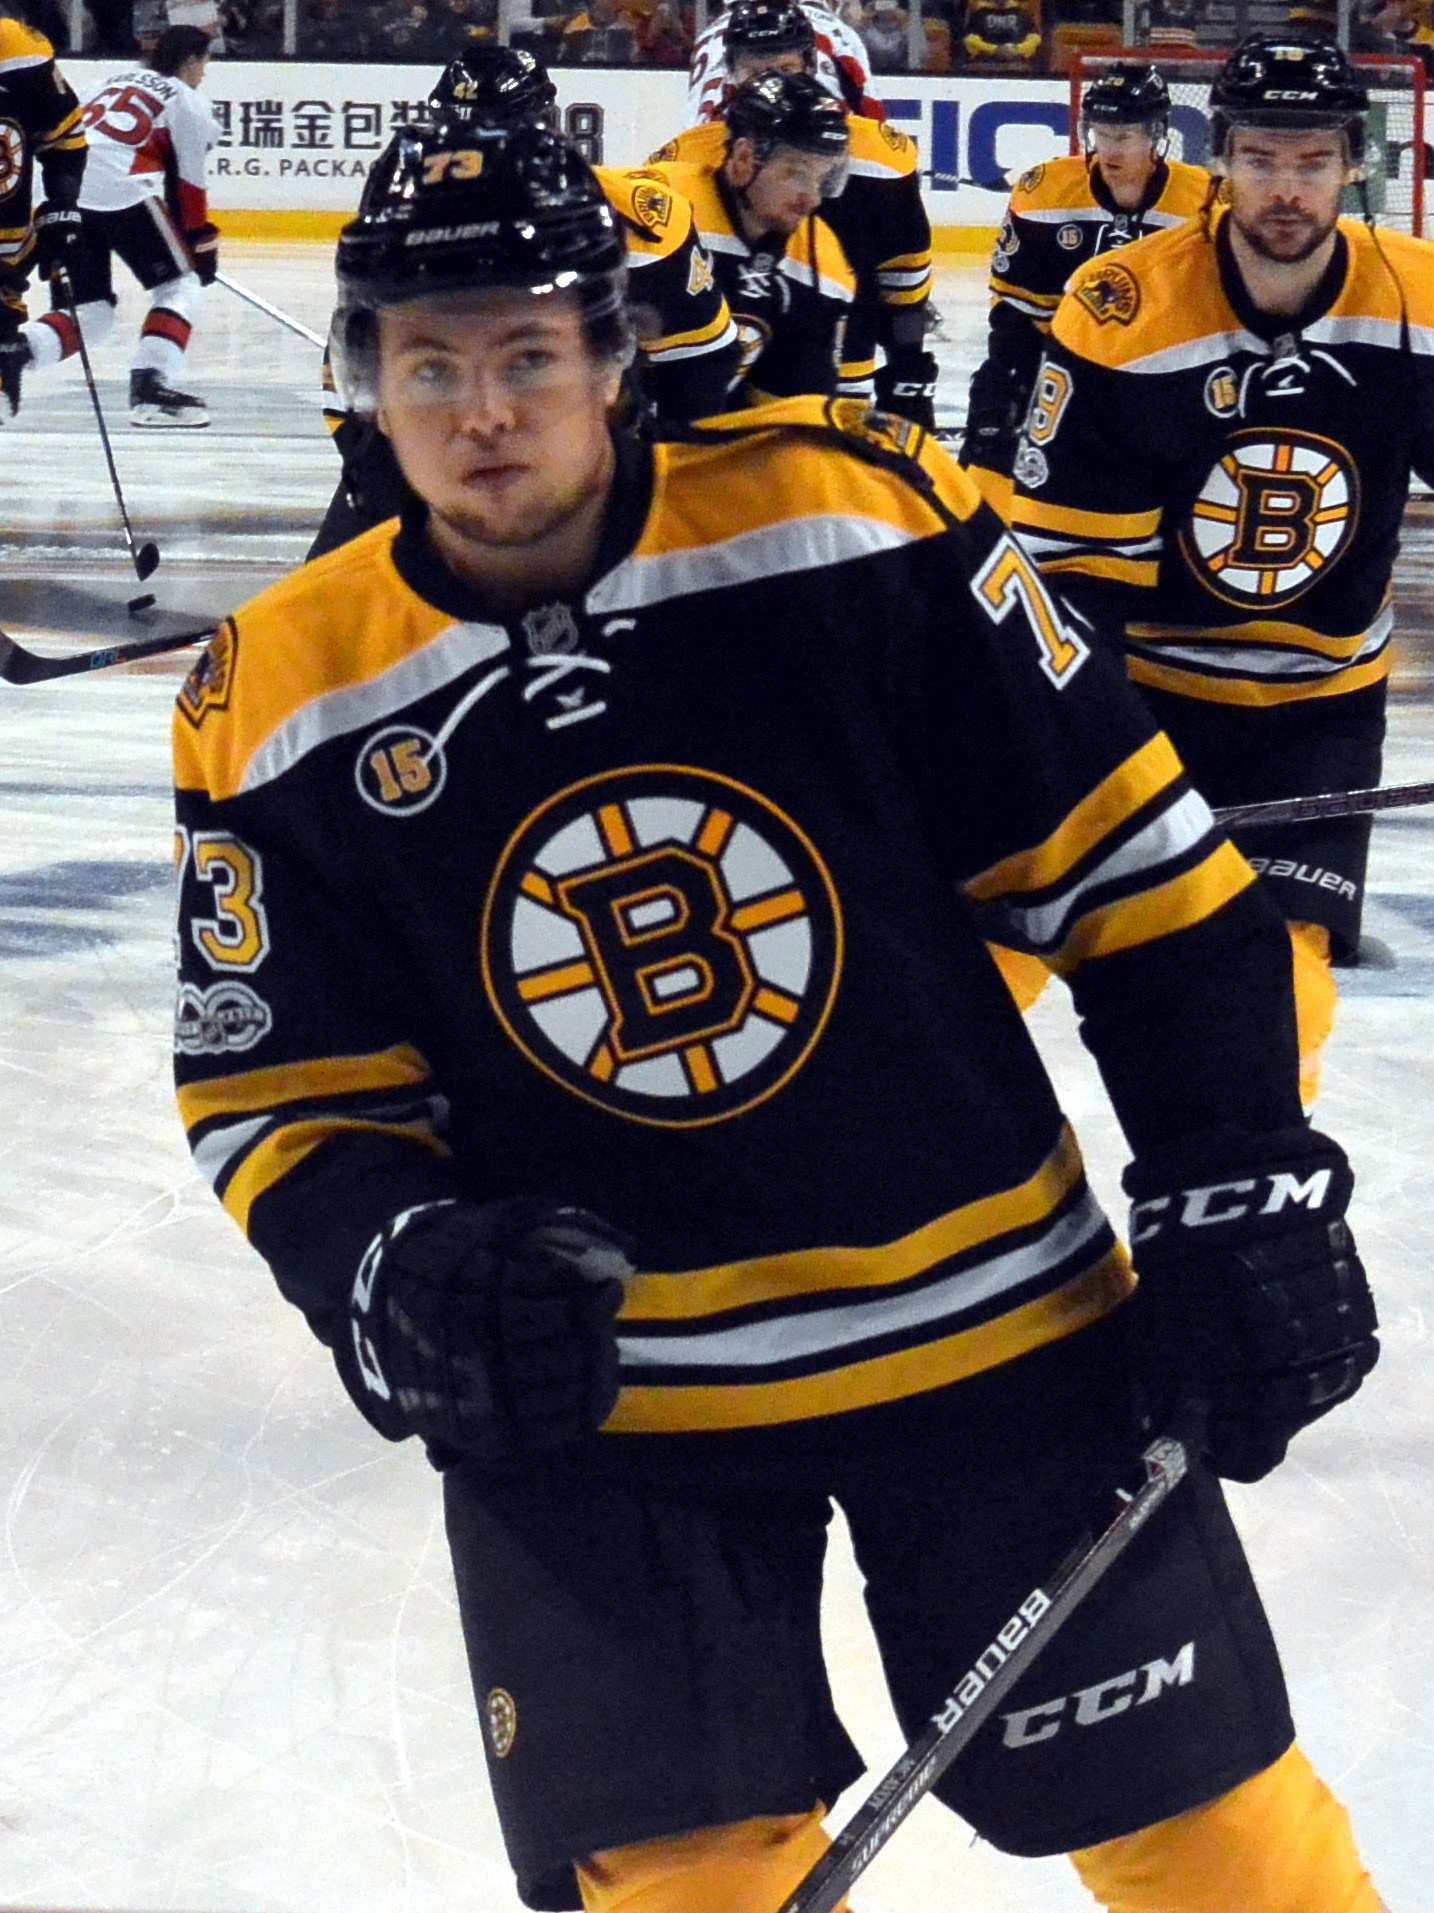 Boston Bruins - Charlie McAvoy helped us wrap up the first